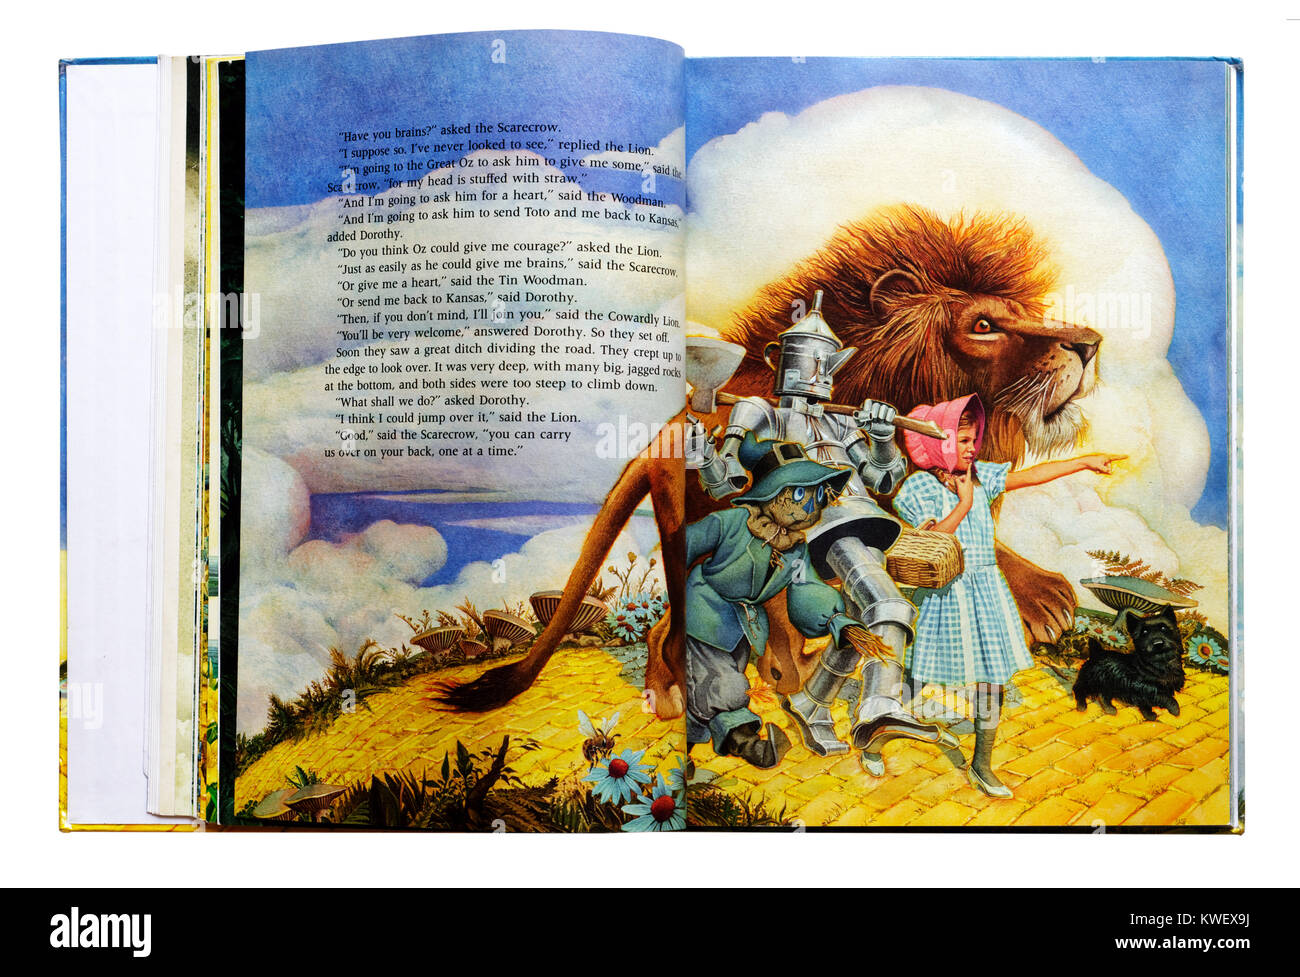 Dorothy, Scarecrow, Tin Woodman and Cowardly Lion on the yellow brick road in an Illustrated book of The Wizard of Oz Stock Photo